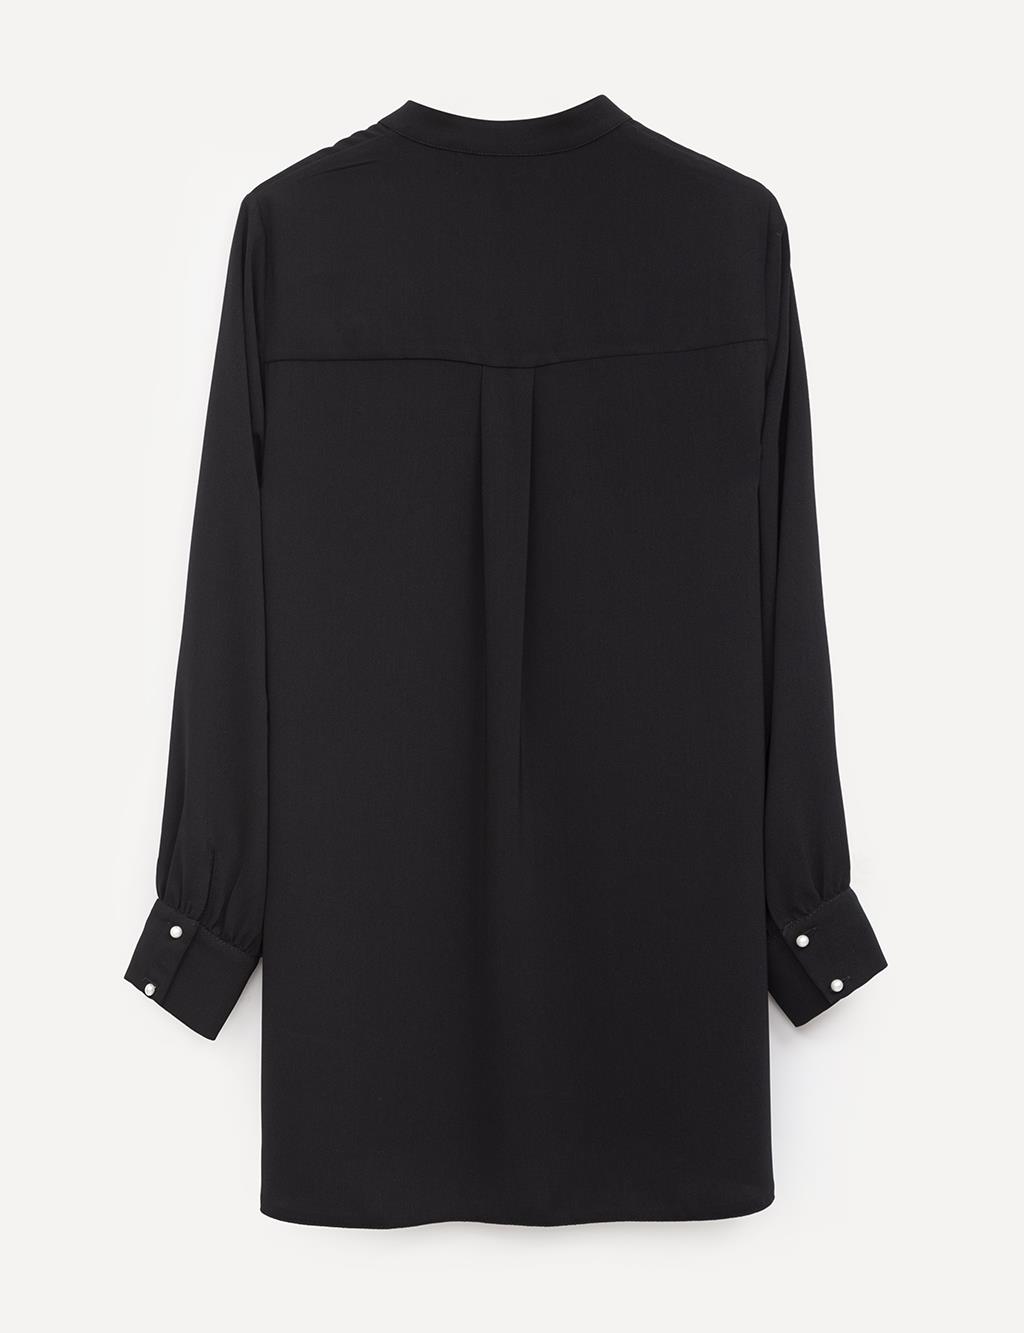 Embroidered Judge Collar Blouse Black